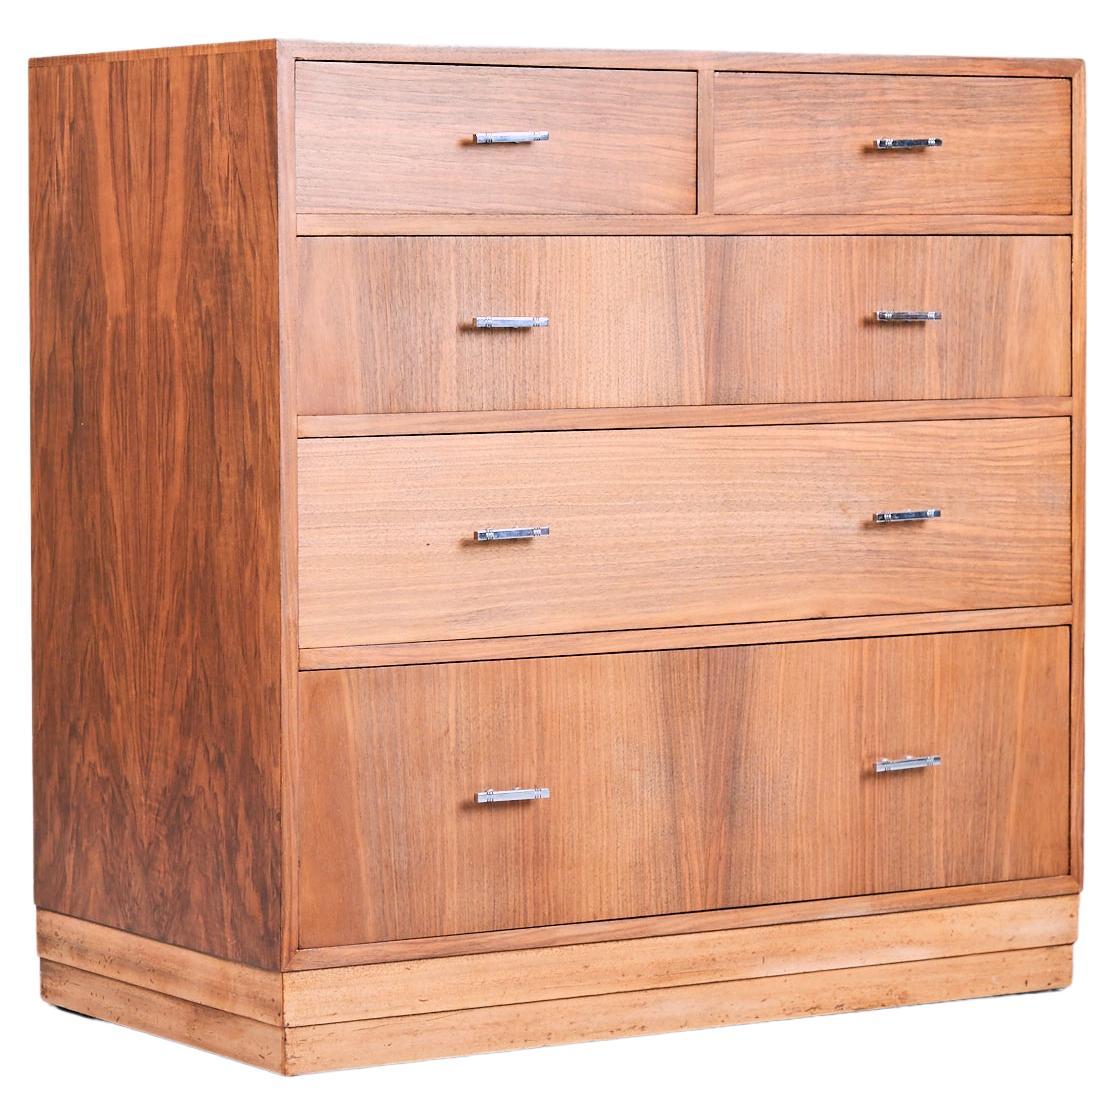 Art Deco Chest of Drawers, Hamptons of Pall Mall, London 1930s